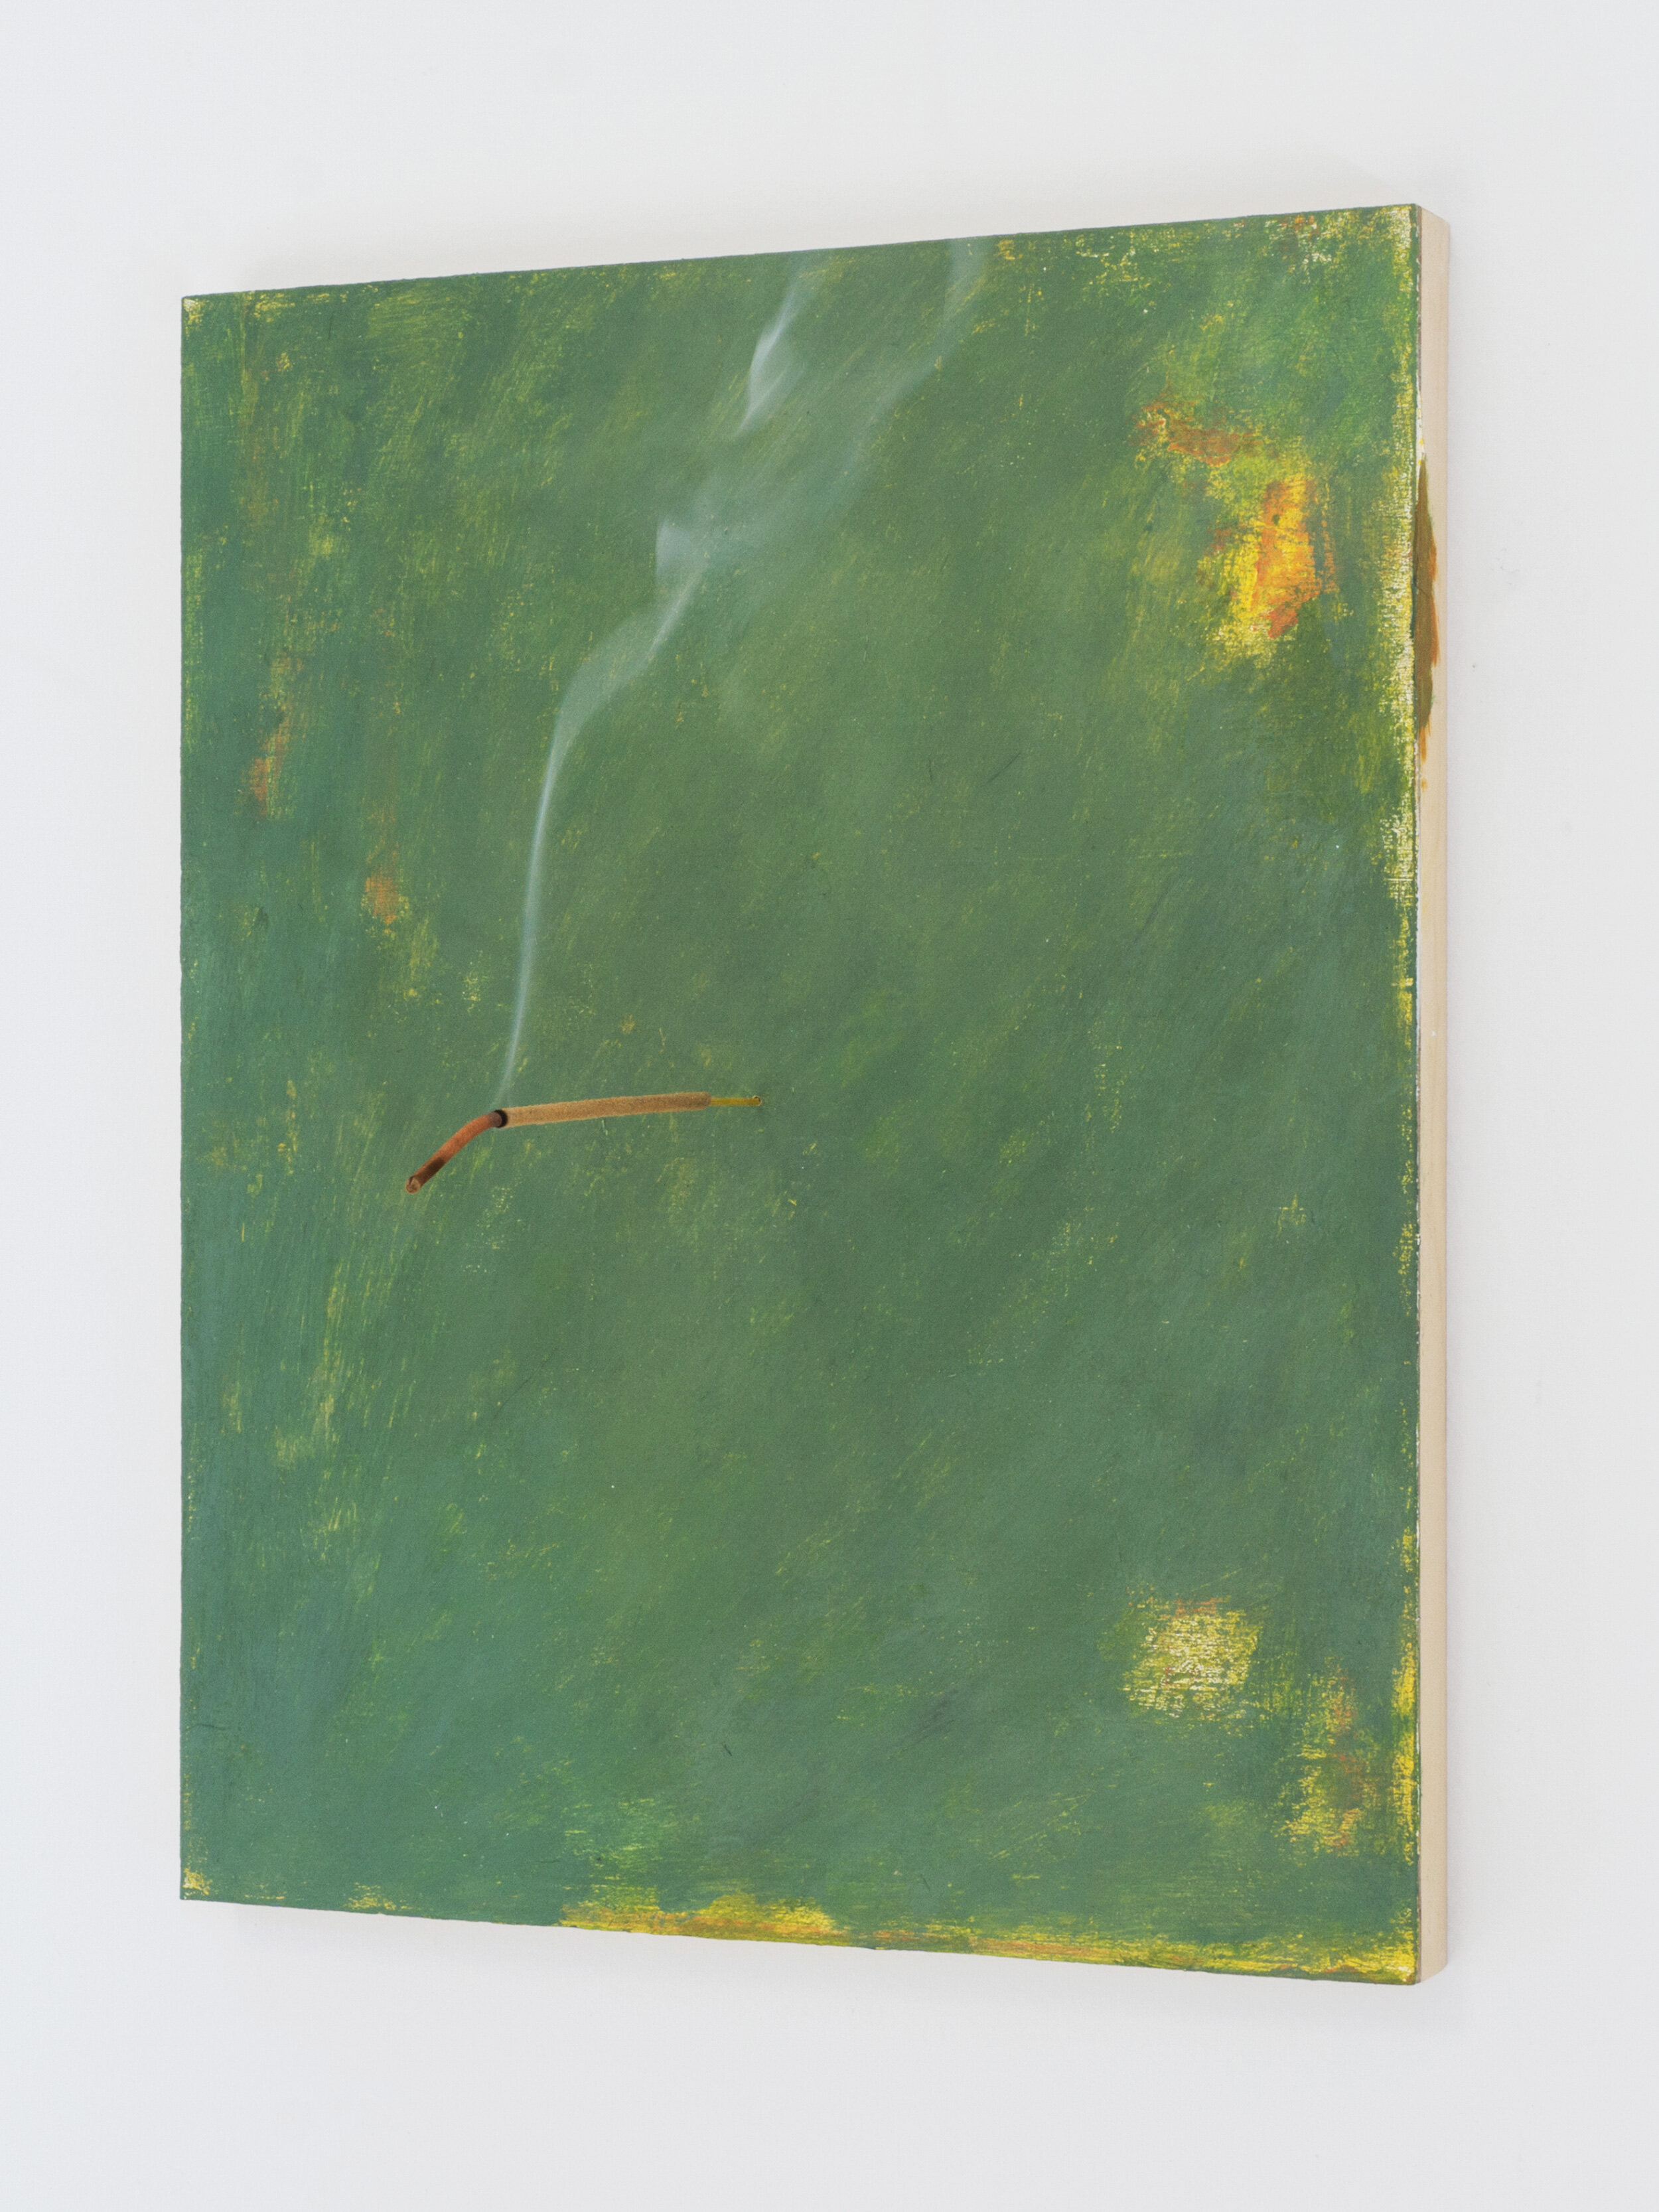  Ted Gahl,  Offering Painting , 2019, acrylic on panel, Nag Champa incense 14 x 11 inches 